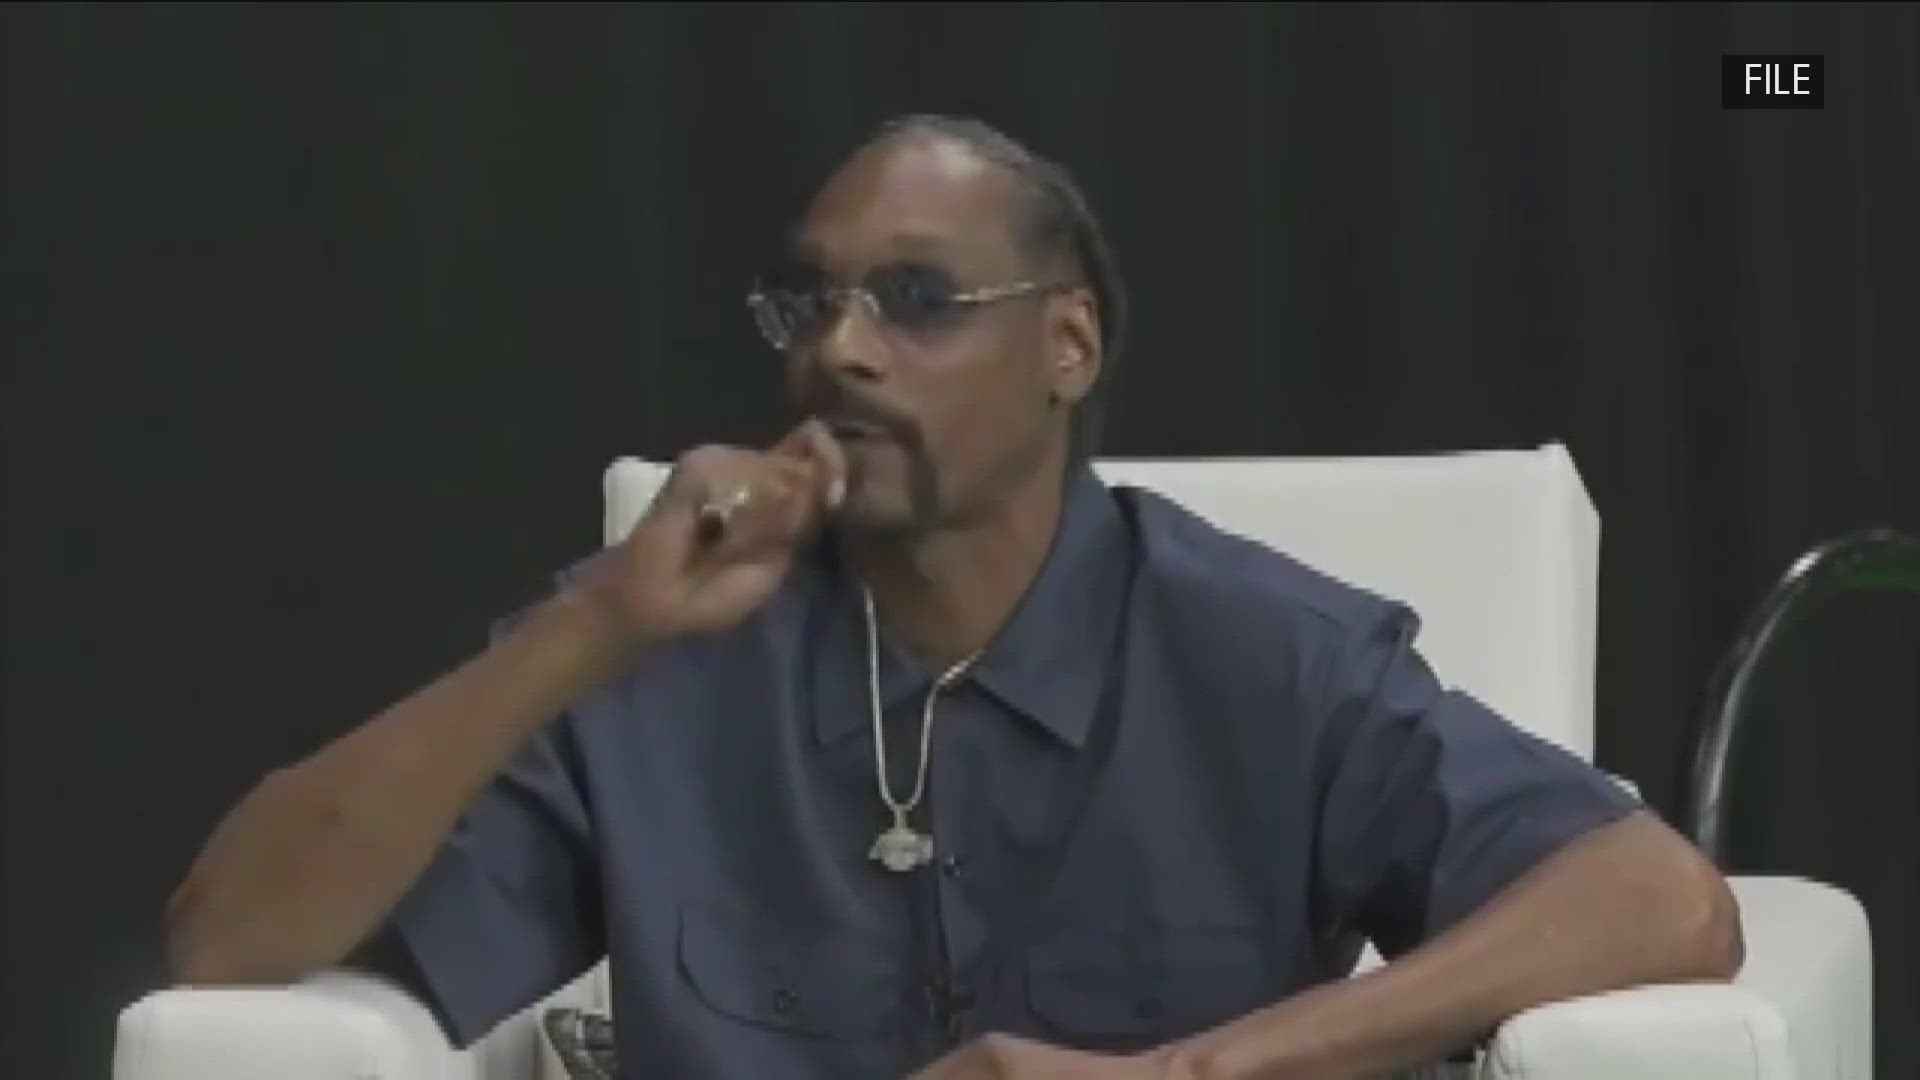 Snoop Dogg will take the stage at the Huntington Center for a performance on July 19. Tickets go on sale Friday.